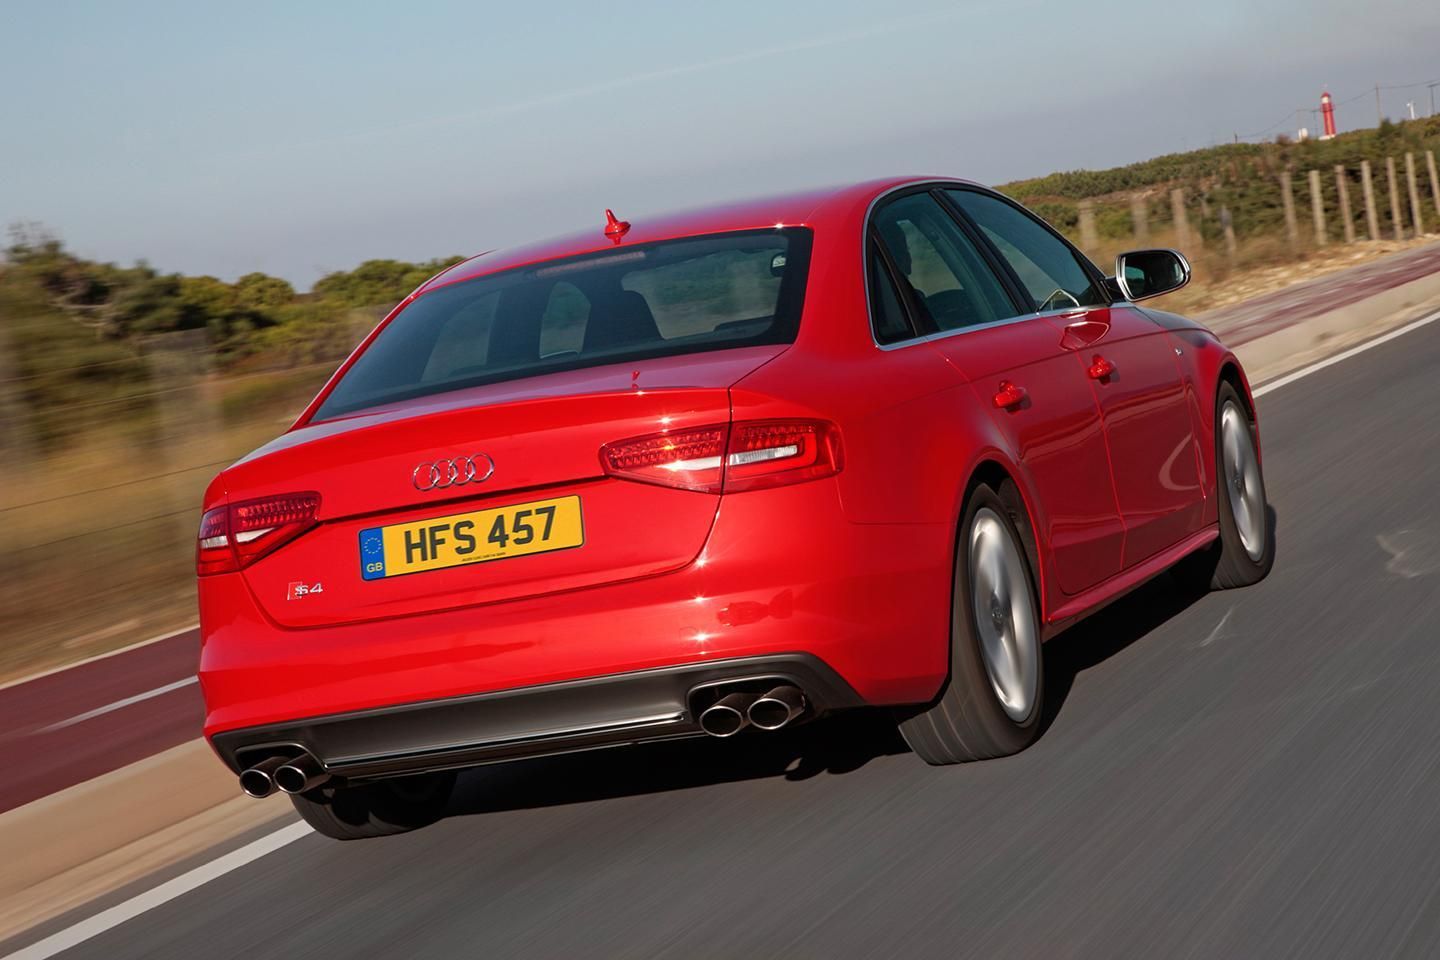 5 Reasons To Buy An Audi S4 Over An Audi A4 (B8/B8.5)